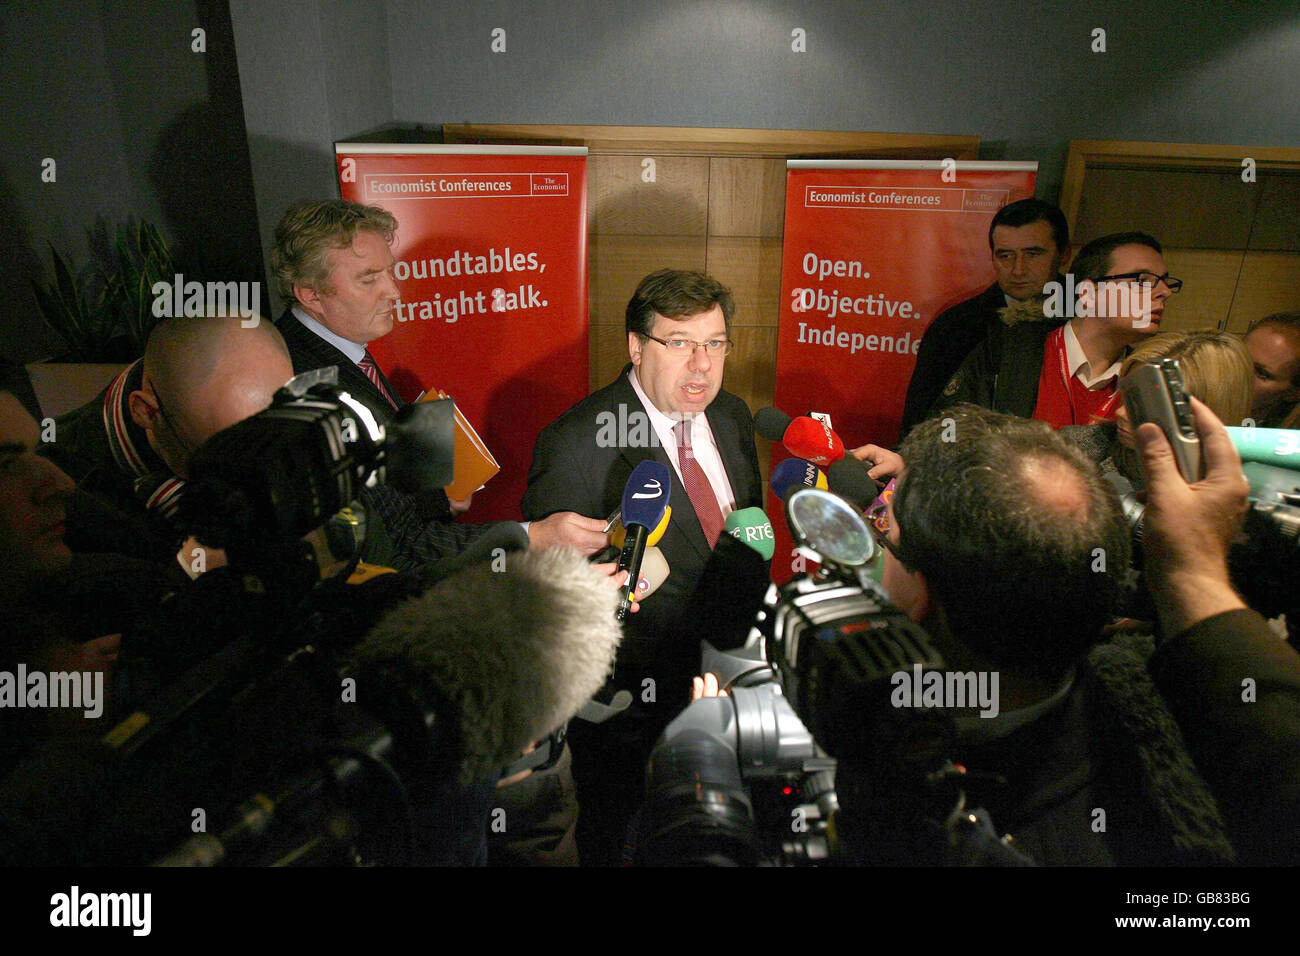 Taoiseach Brian Cowen takes questions from the media after addressing the Economist Conferences' First Business Roundtable at the Conrad Hotel in Dublin today. Stock Photo